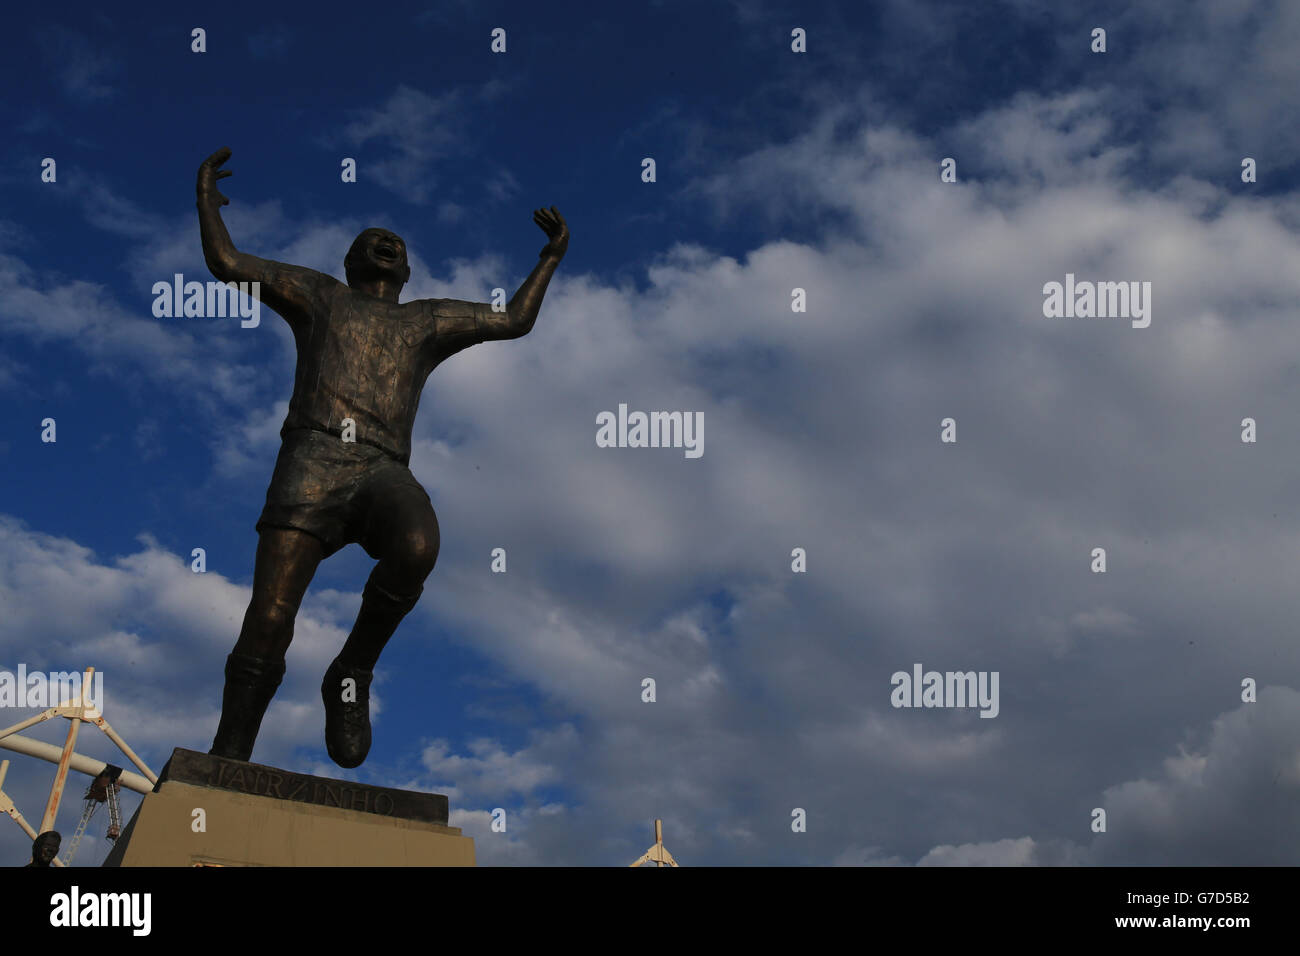 Former Botafogo footballer Jairzinho's statue outside J. Havelange Olympic Stadium host for the Rio Olympics 2016 under construction known locally as the 'Engenhao' (after the Engenho de Dentro neighborhood in which it is located) which will stage the athletics track and field events during the Olympic and Paralympic Games. Stock Photo